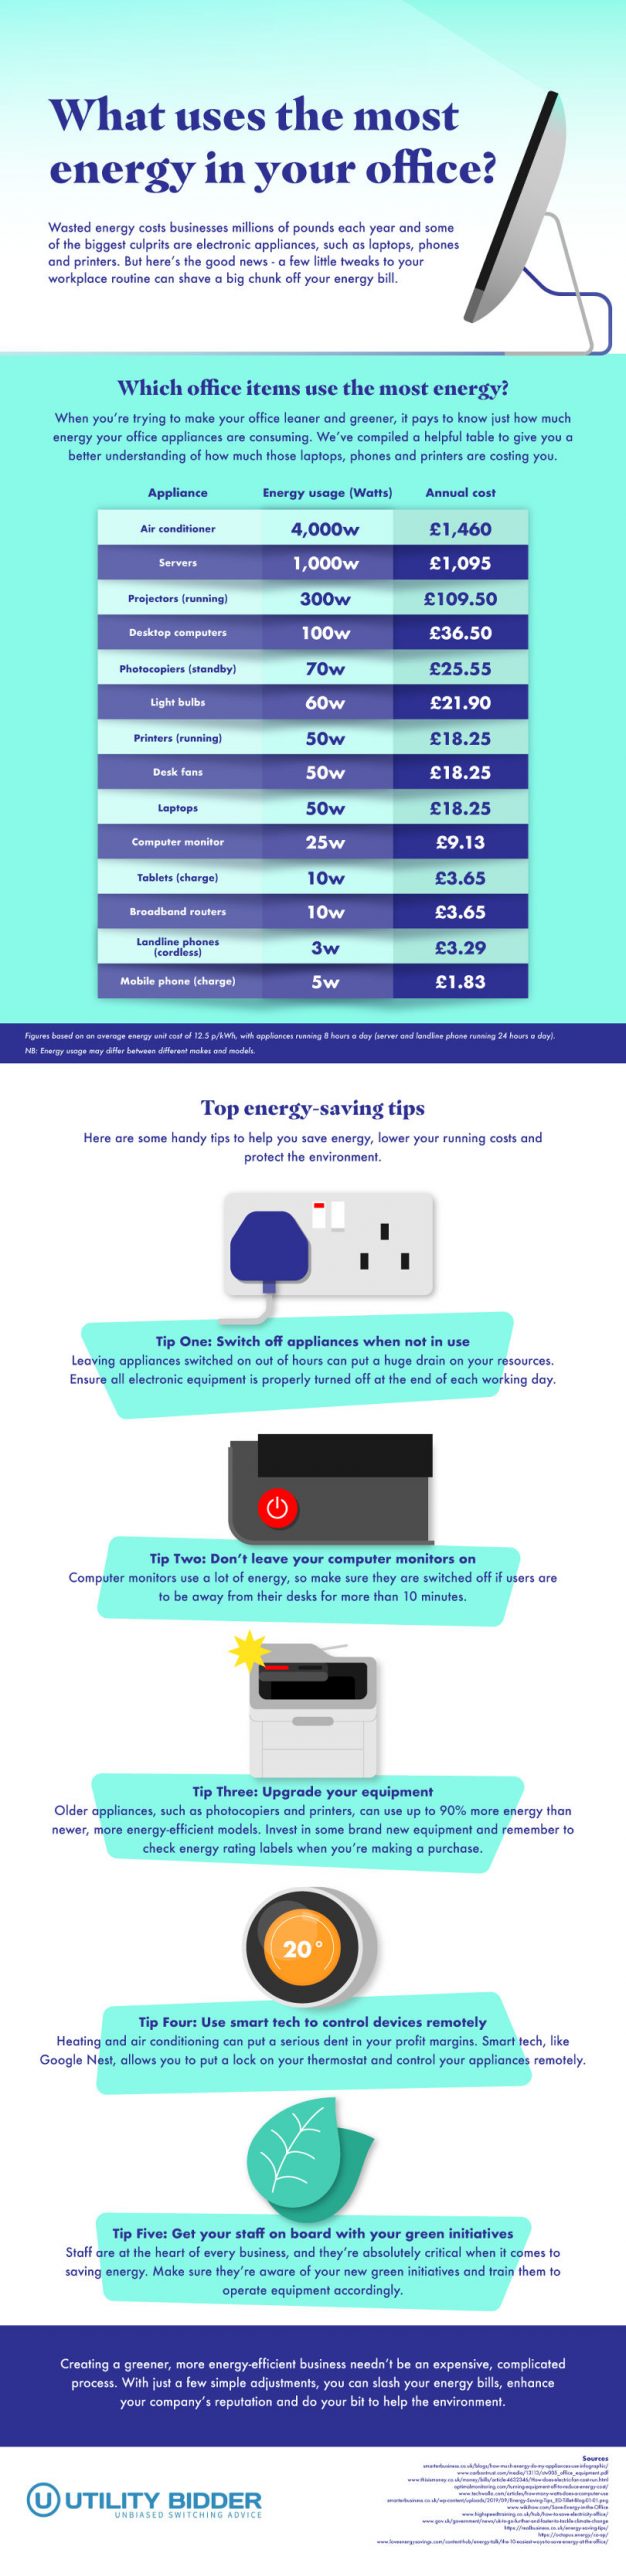 Office energy usage - infographic by Utility Bidder